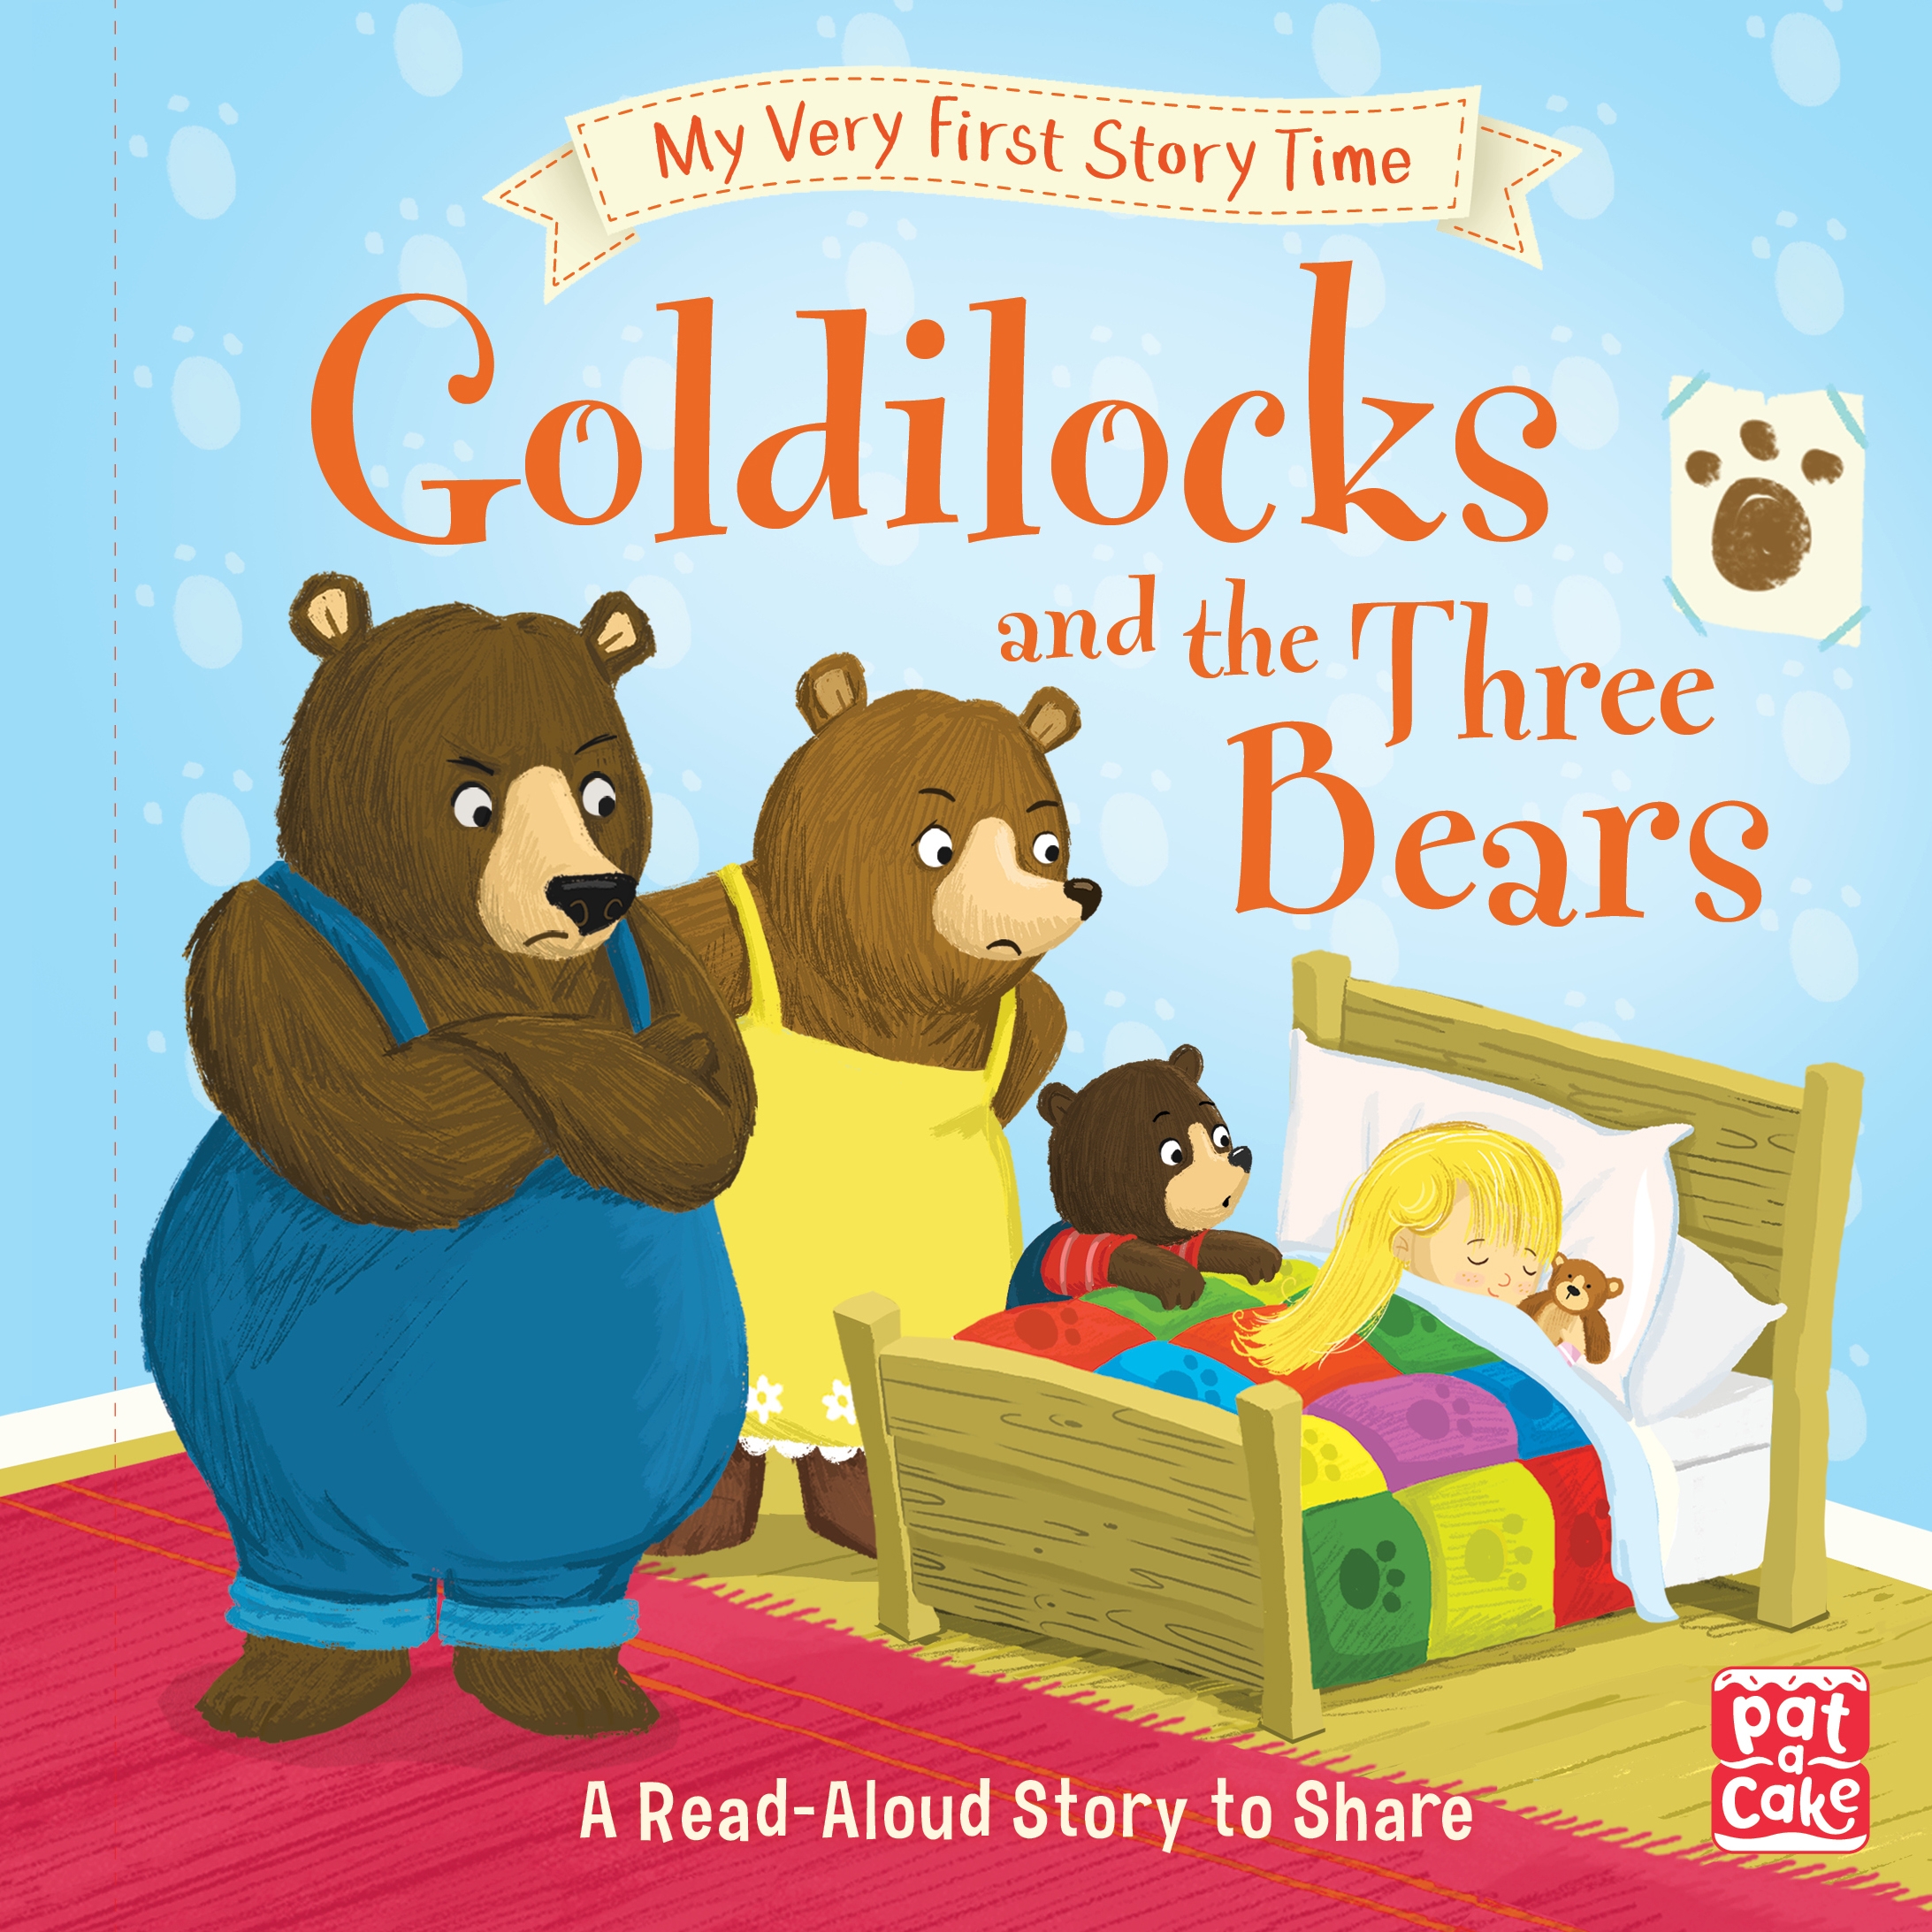 Top 94+ Images goldilocks and the three bears story with pictures Completed